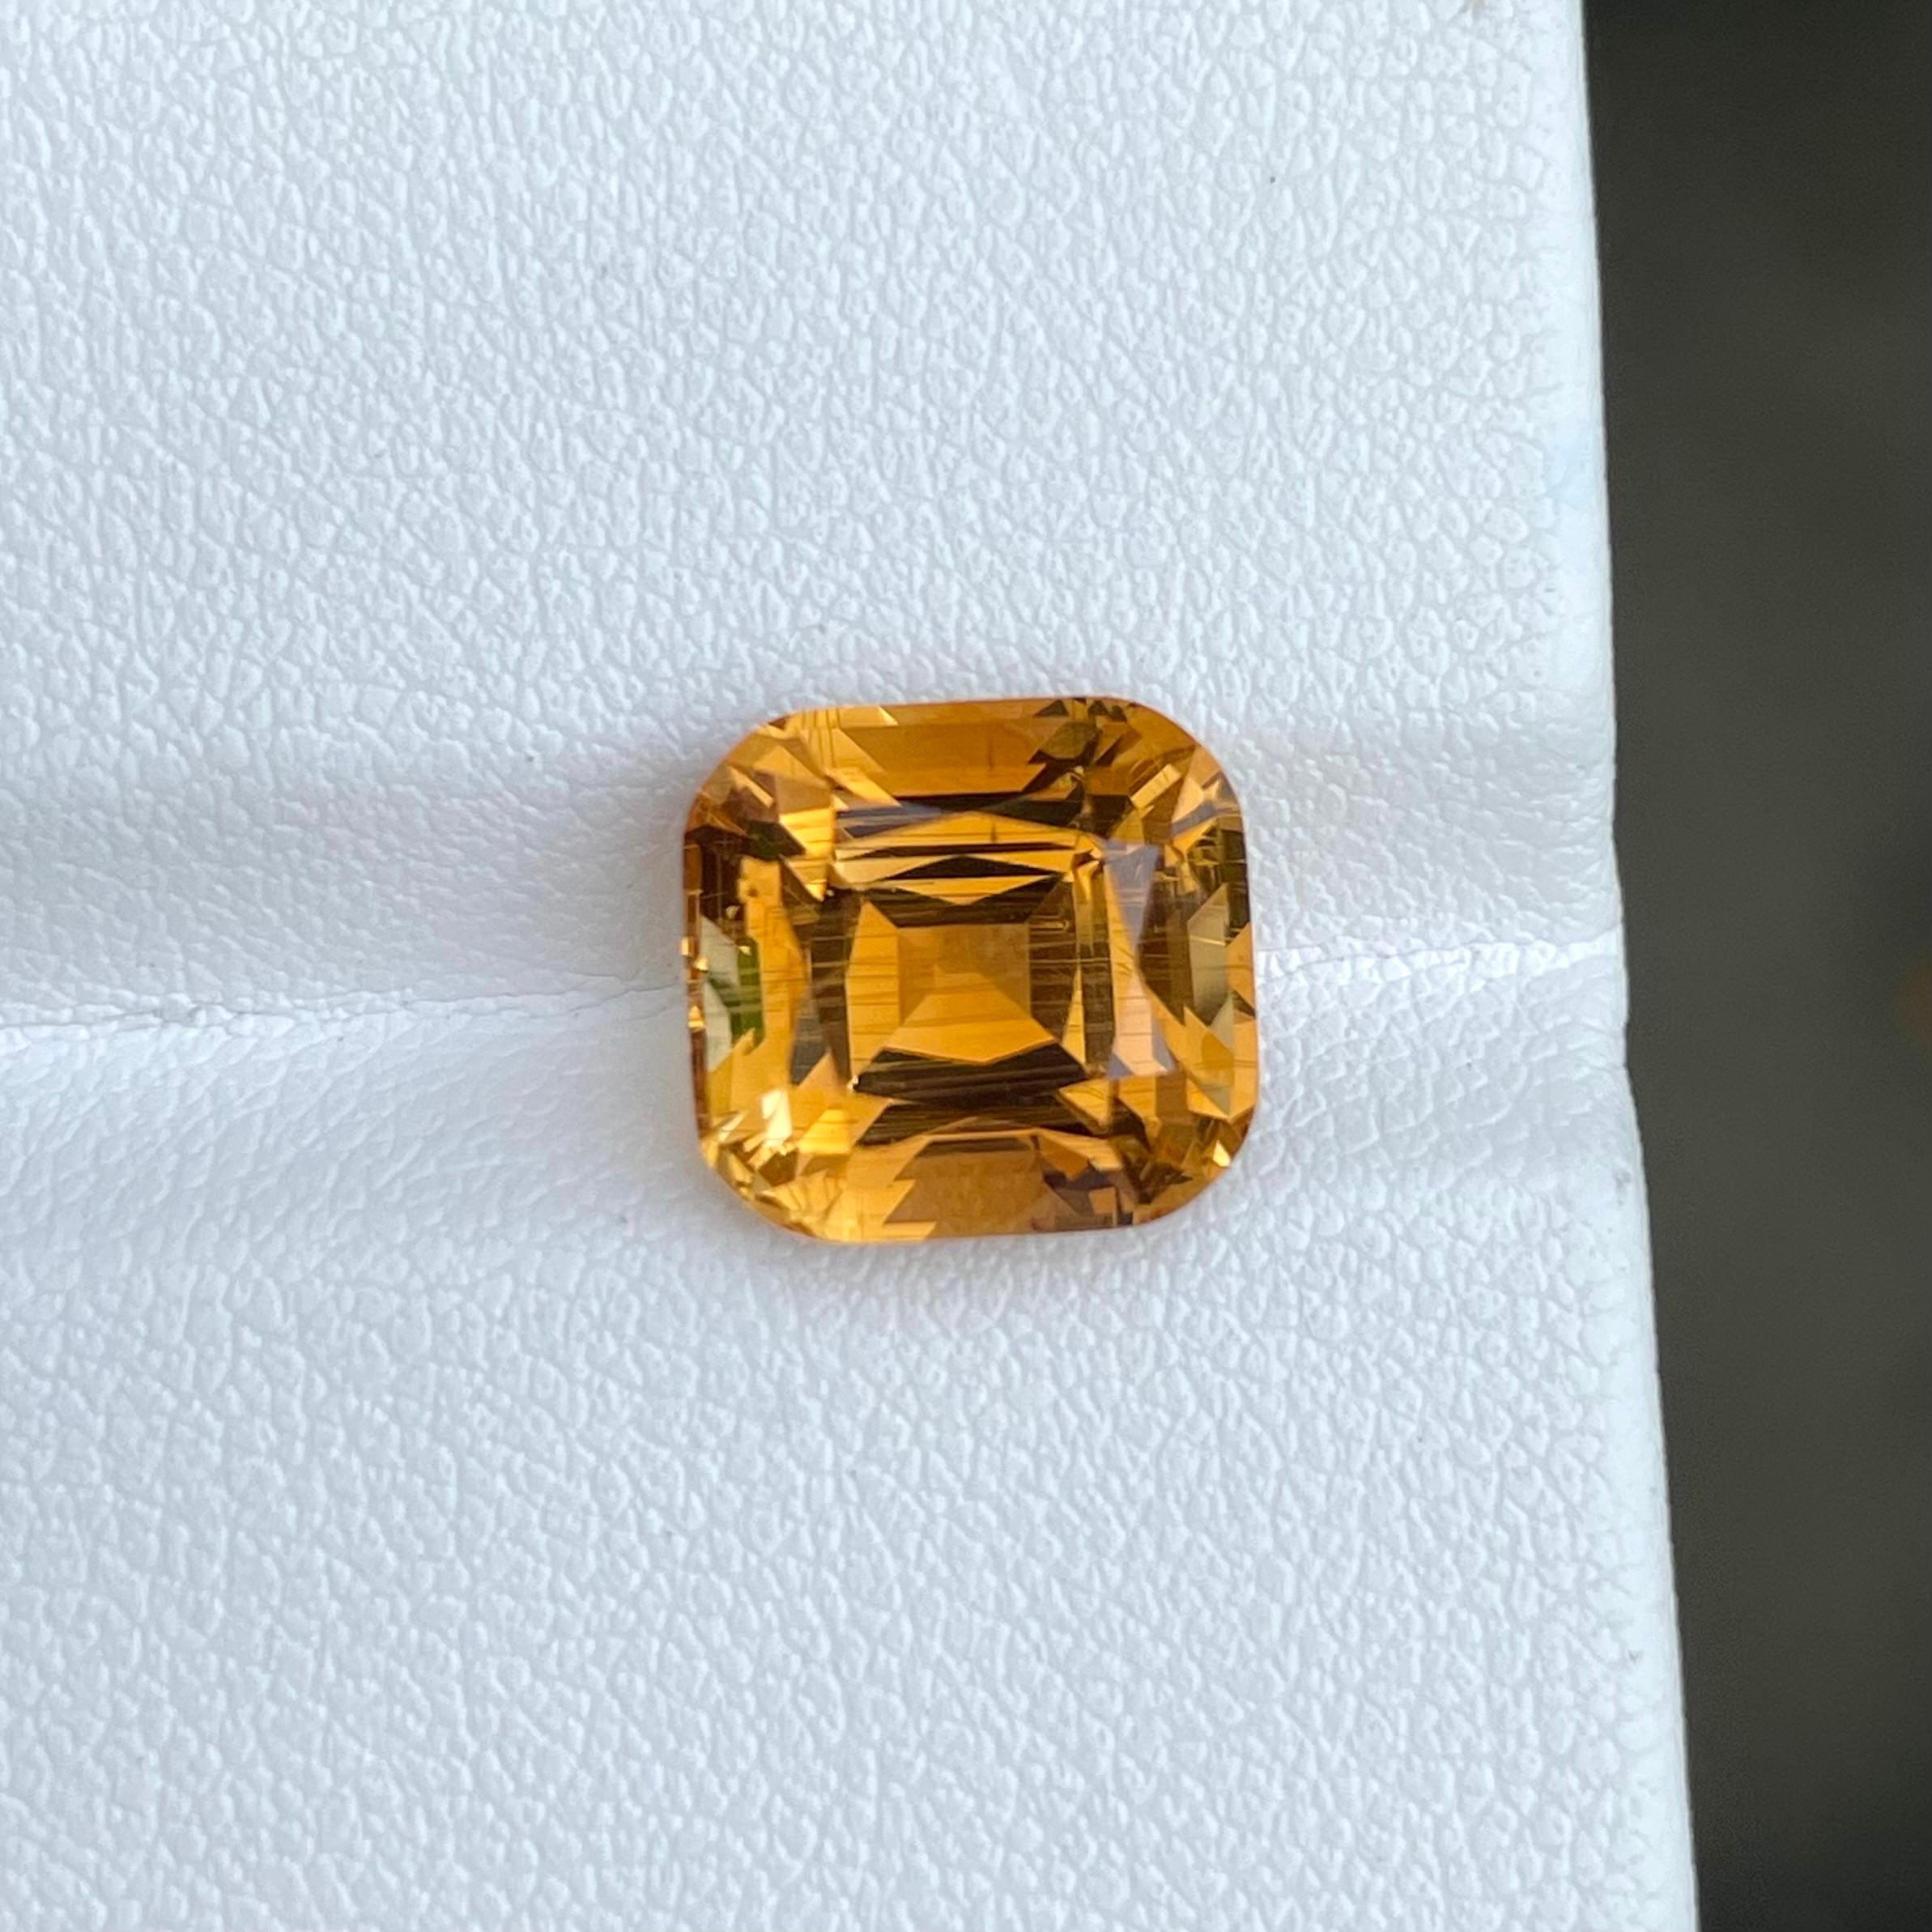 Weight 6.30 carats 
Dimensions 10.7 x 10.1 x 8.2 mm
Treatment None 
Origin Brazil 
Clarity SI (Slightly Included)
Shape Cushion 
Cut Fancy Cushion



Elevate your jewelry collection with the dazzling allure of a 6.30 carat Fire Citrine, a true